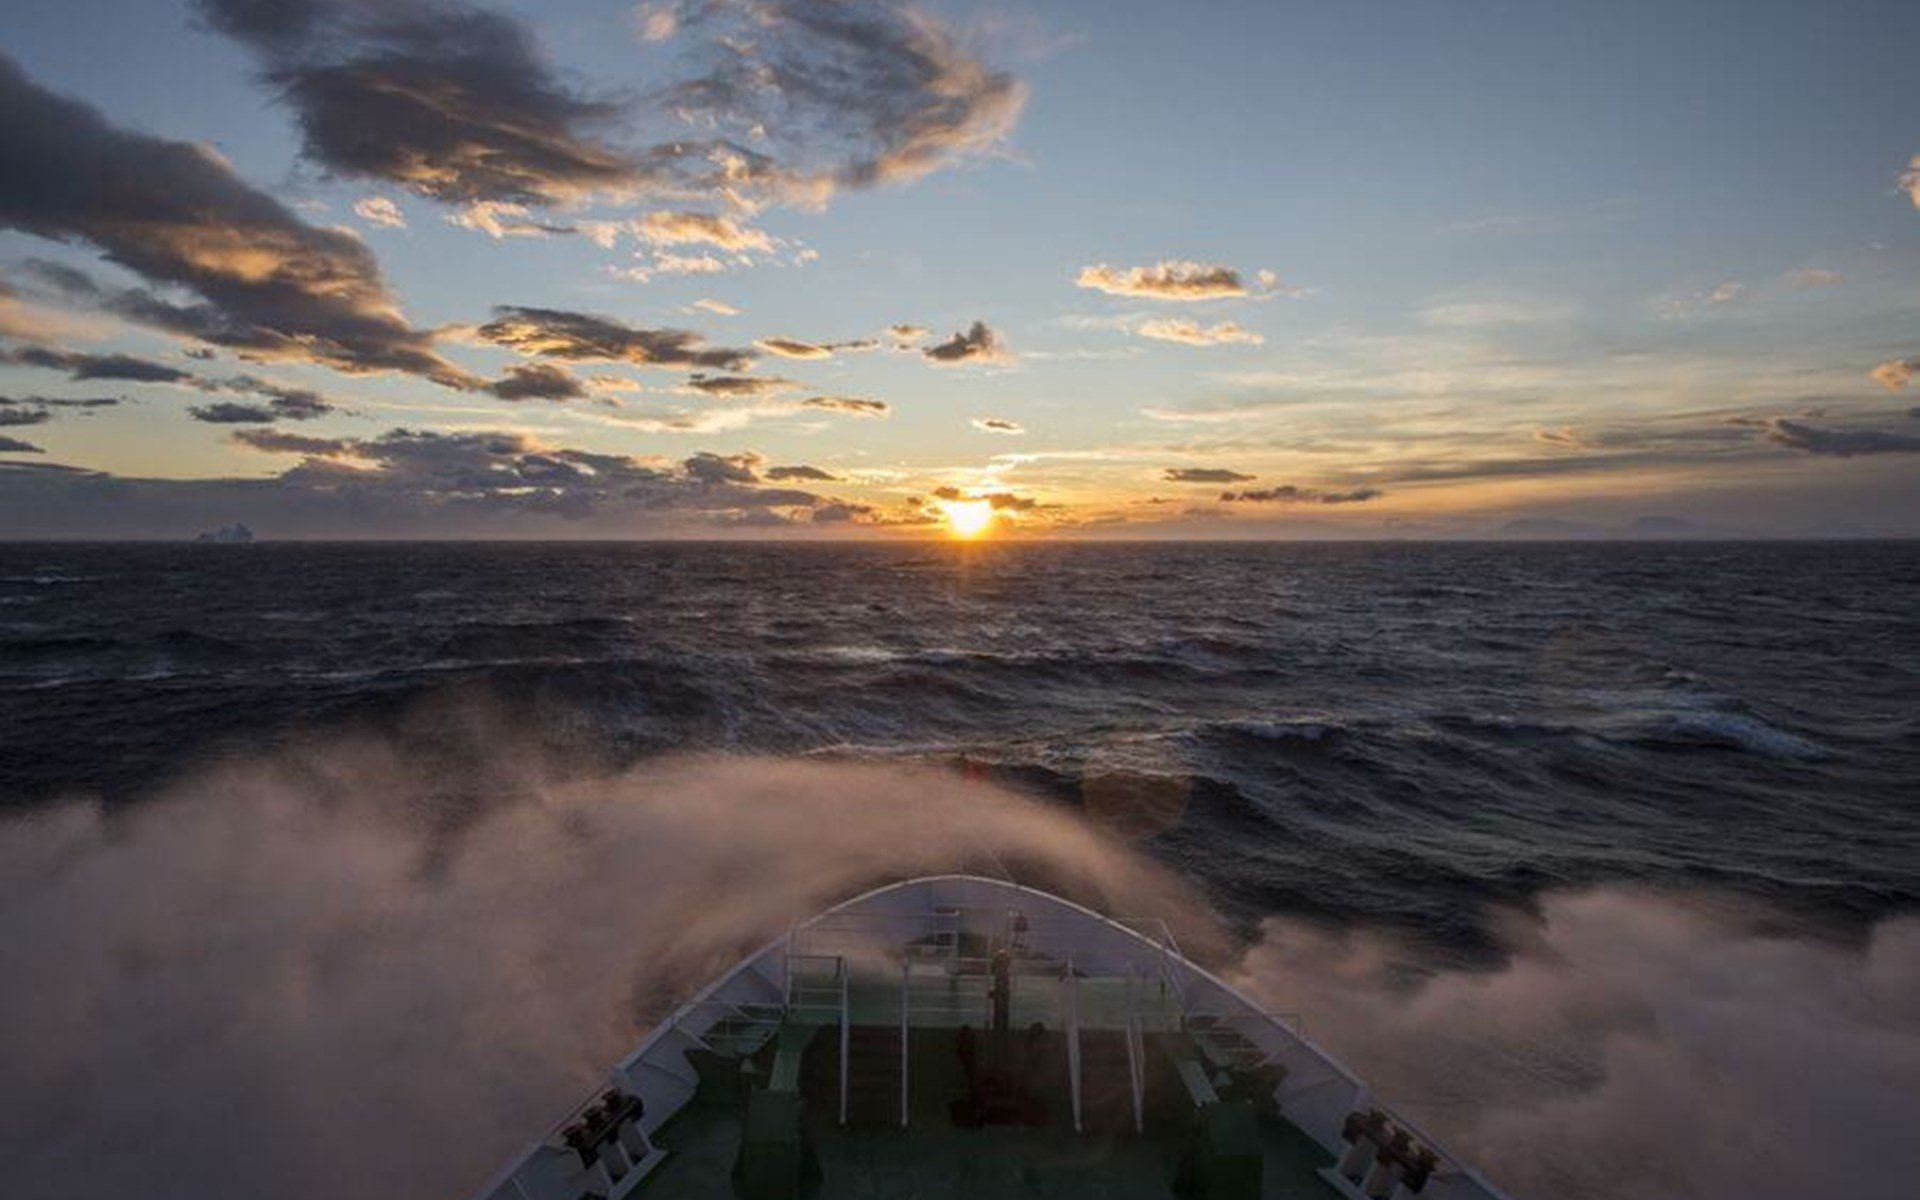 antarctica-drakes-passage-sunset-expedition-ship-bow-n9a8786-lg-rgb